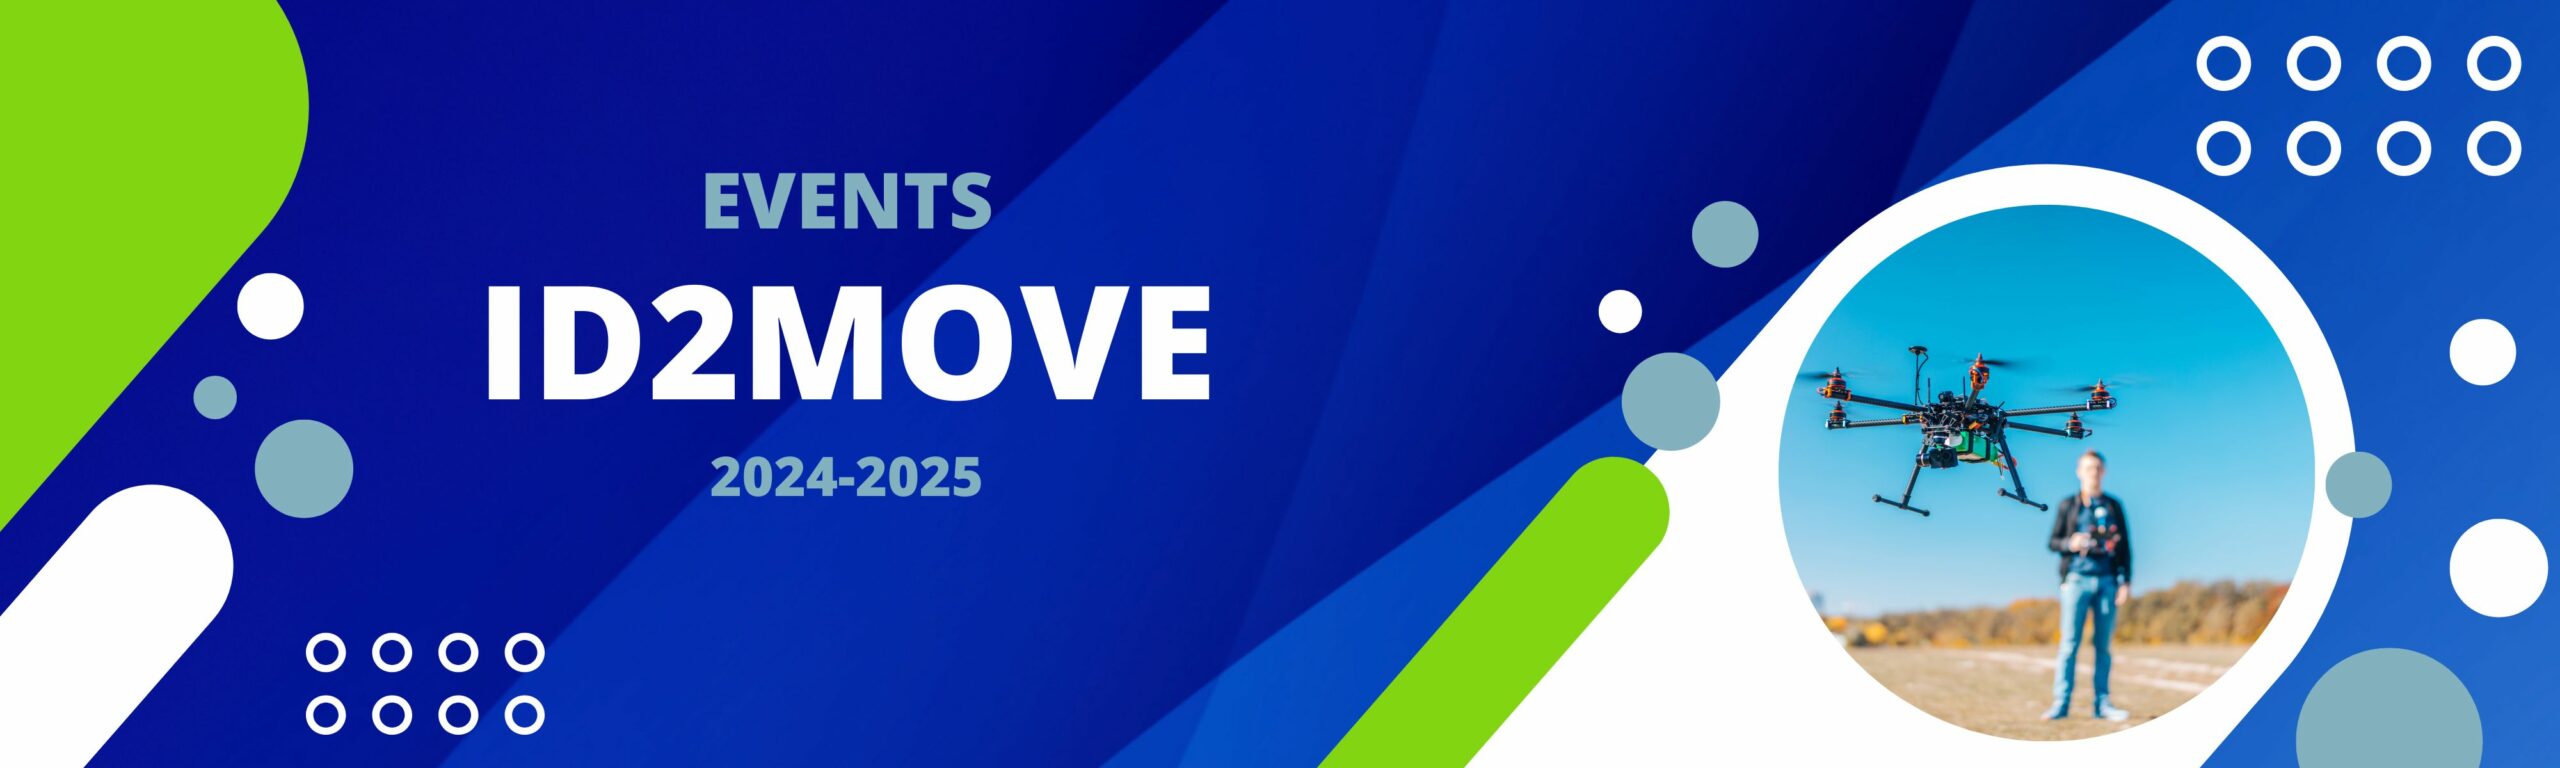 ID2Move Events 2024-2025